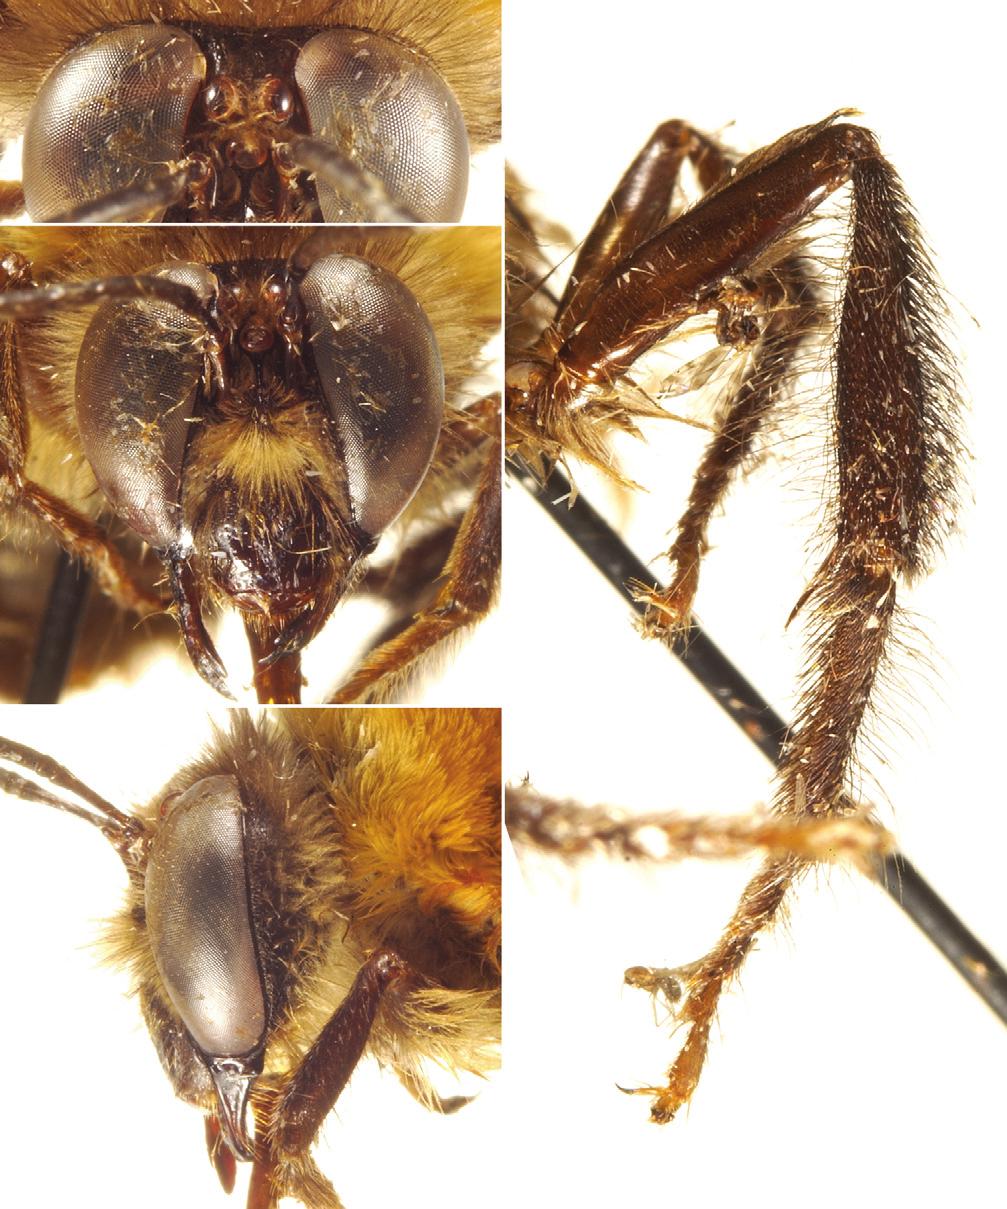 60 Charles D. Michener & Michael S. Engel / ZooKeys 5: 53-64 (2009) 5 6 7 8 Figs. 5-8. Male of Caupolicana (Zikanapis) wileyi sp. n. 5) Ocellar view. 6) Facial view. 7) Lateral aspect of head.